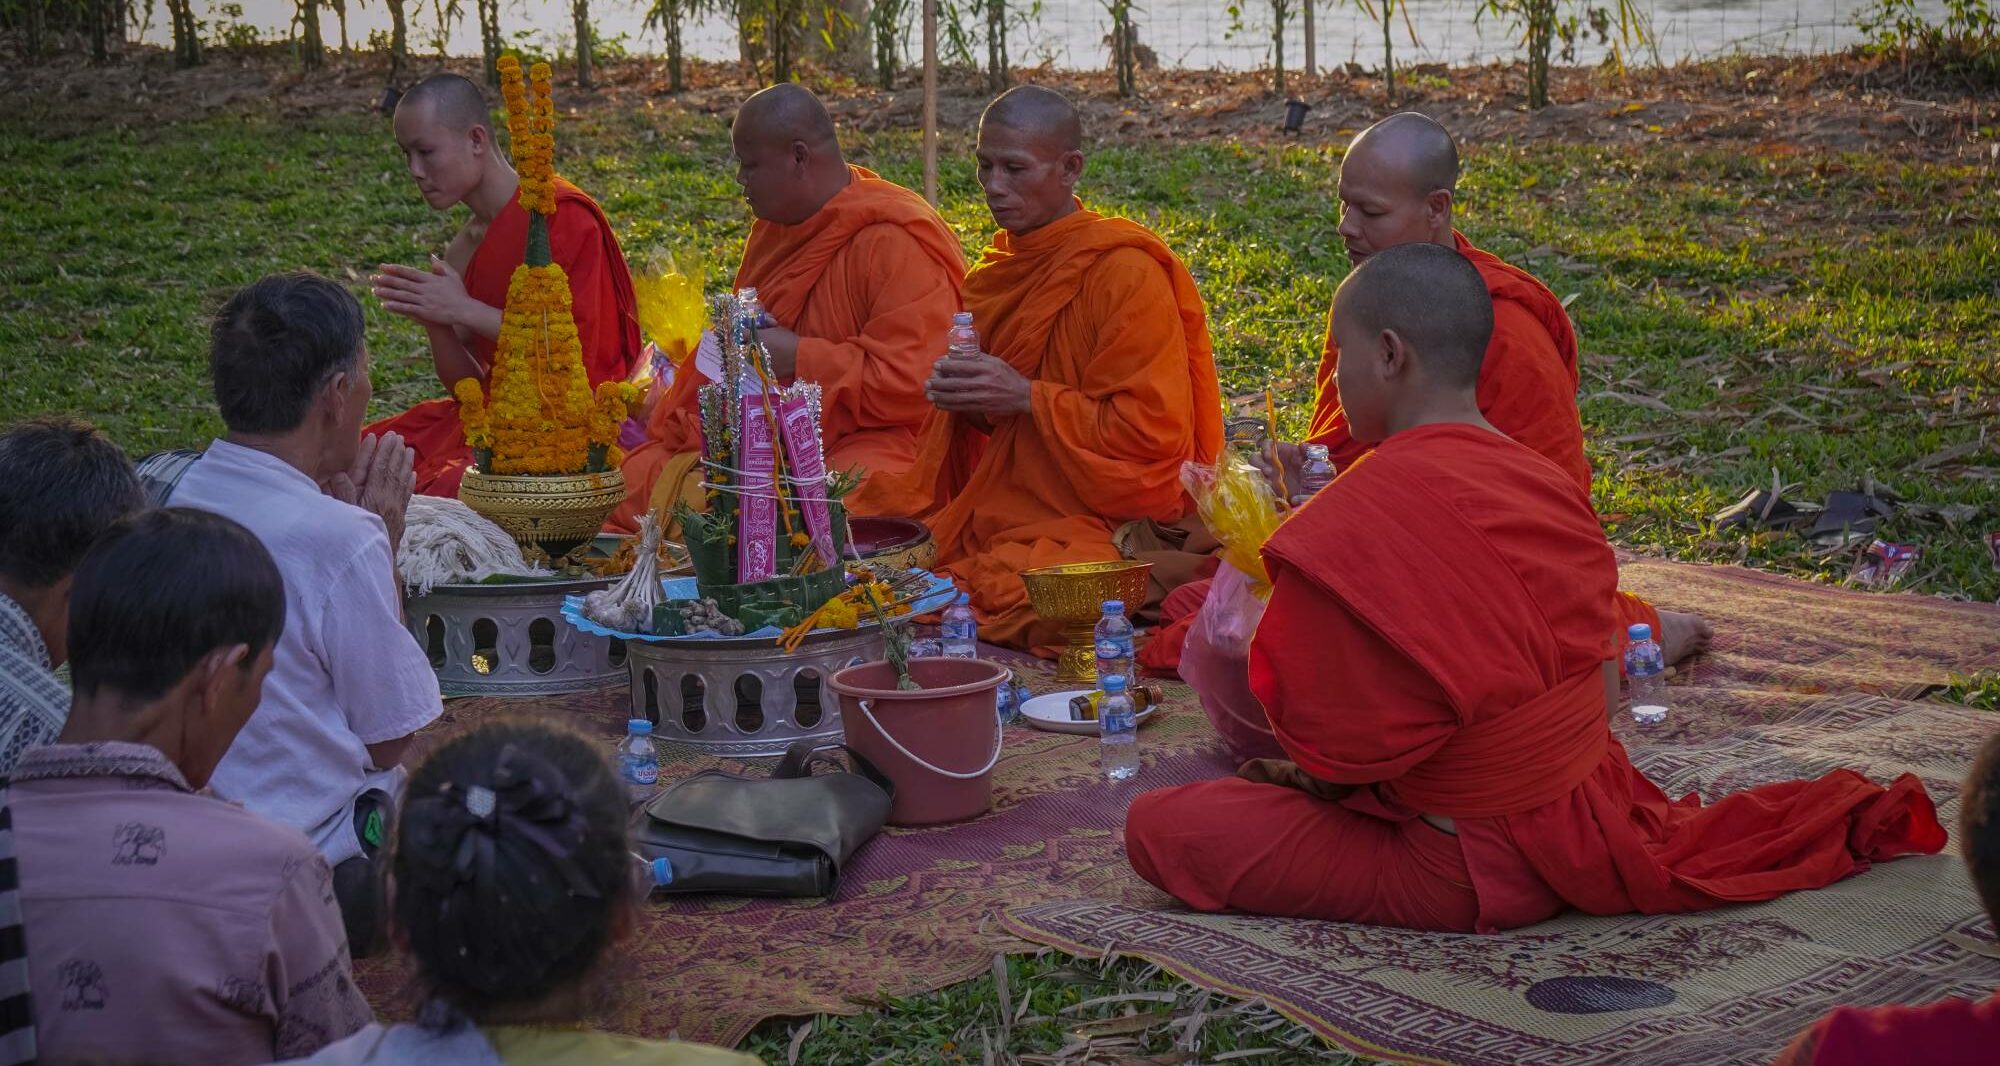 A group of monks sitting around a table in front of the Luang Prabang river.